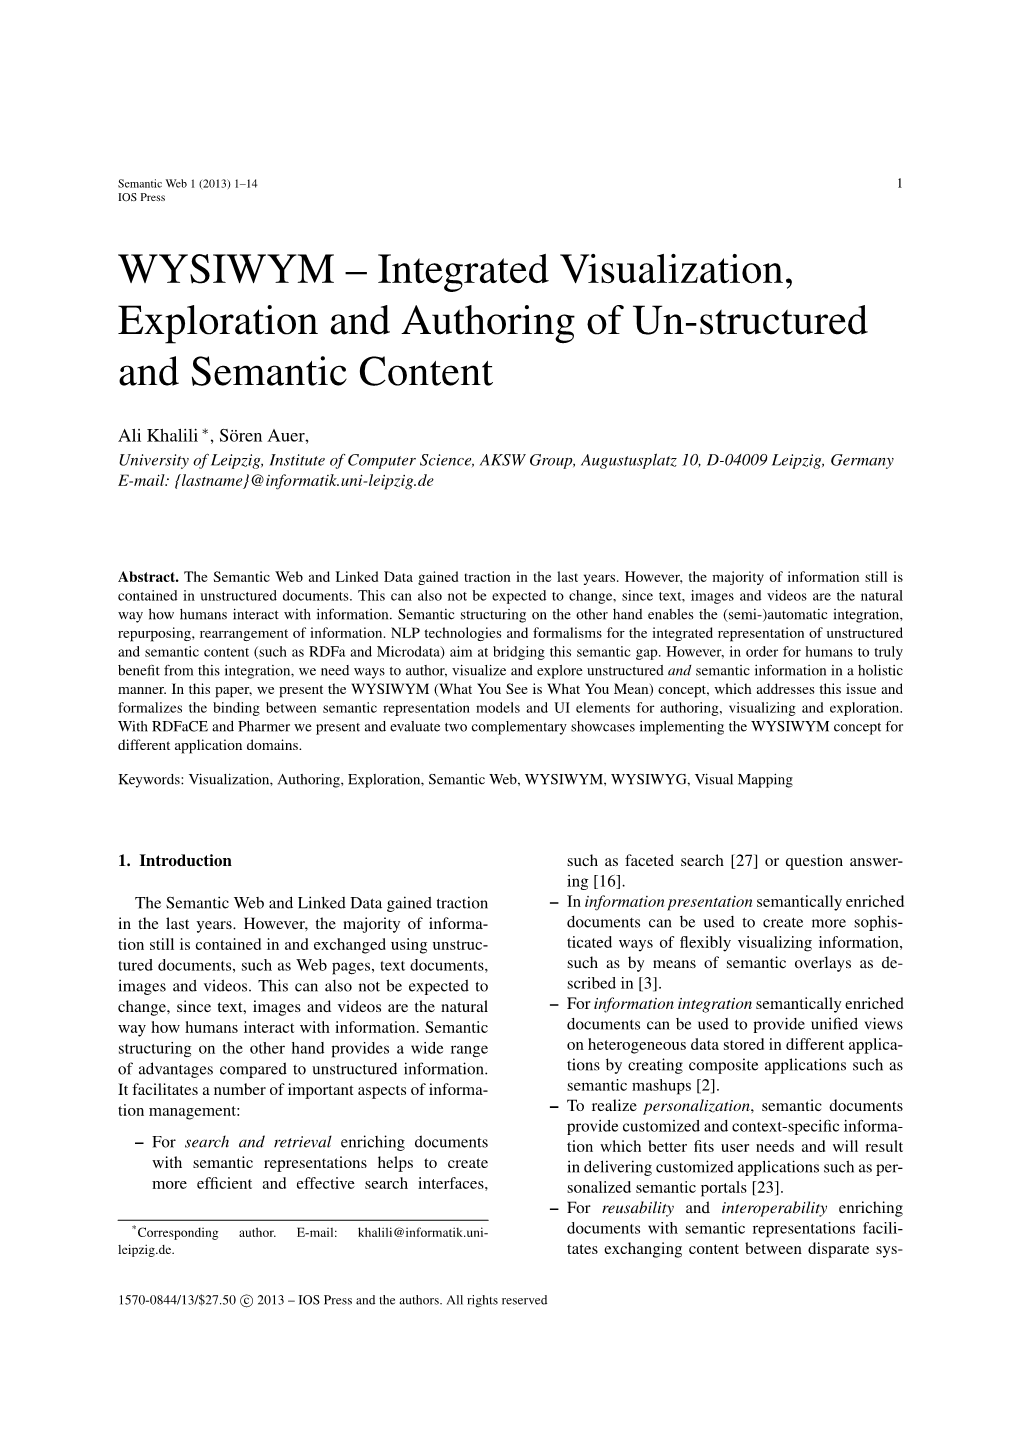 WYSIWYM – Integrated Visualization, Exploration and Authoring of Un-Structured and Semantic Content